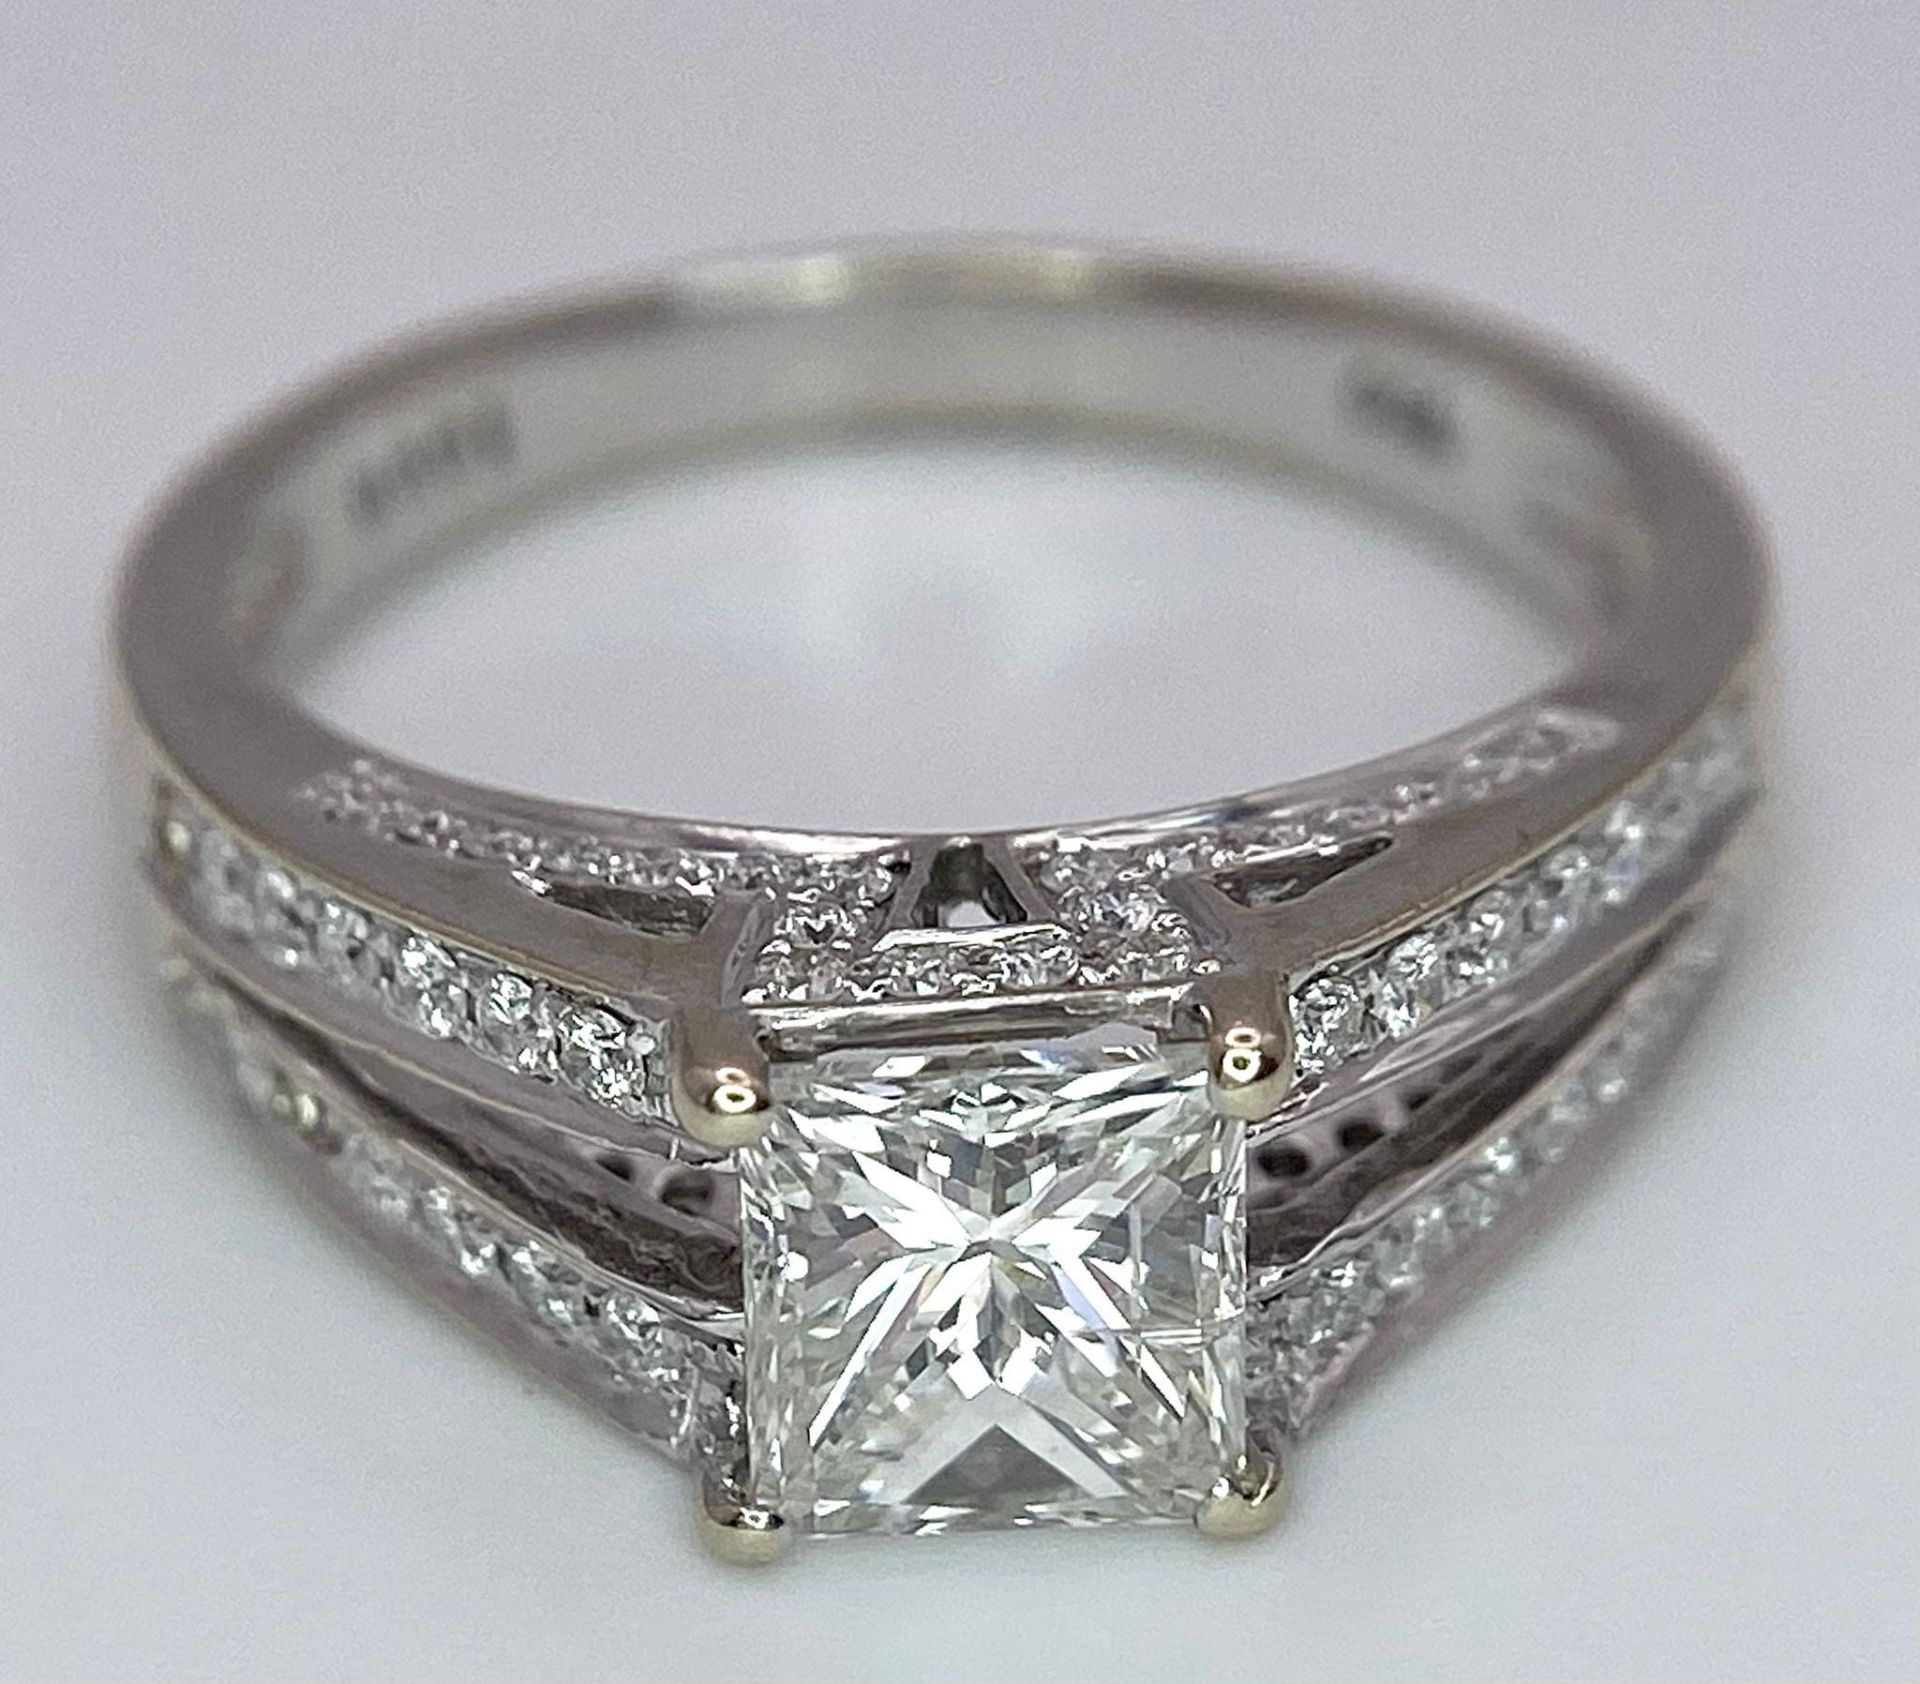 An 18K White Gold Diamond Ring. Central VS2 1ct Princess Cut Near White Diamond with Round Cut - Image 7 of 10